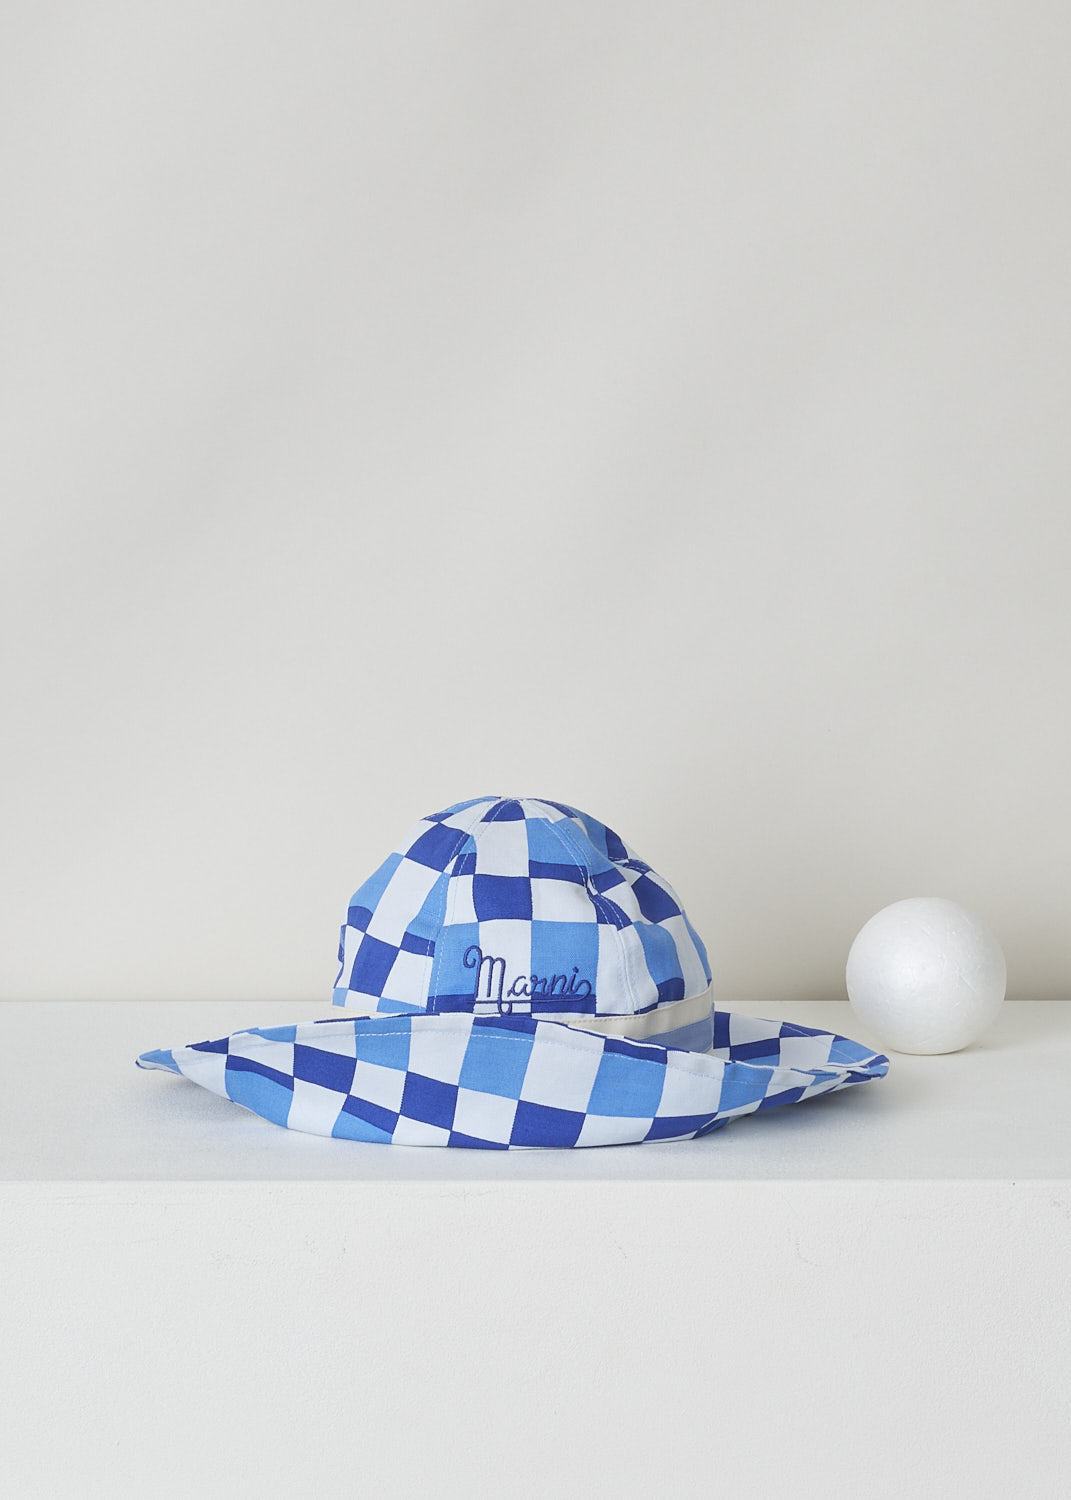 MARNI, BLUE CHECKERED BUCKET HAT, CLMC0039QX_UTC138_IDB19, Print, Blue, Front, This blue checkered bucket hat has a broad blue and white striped band above the brim. The brand's lettering can be found embroidered on the front. 

circumference: 60 cm / 23.6 inch
